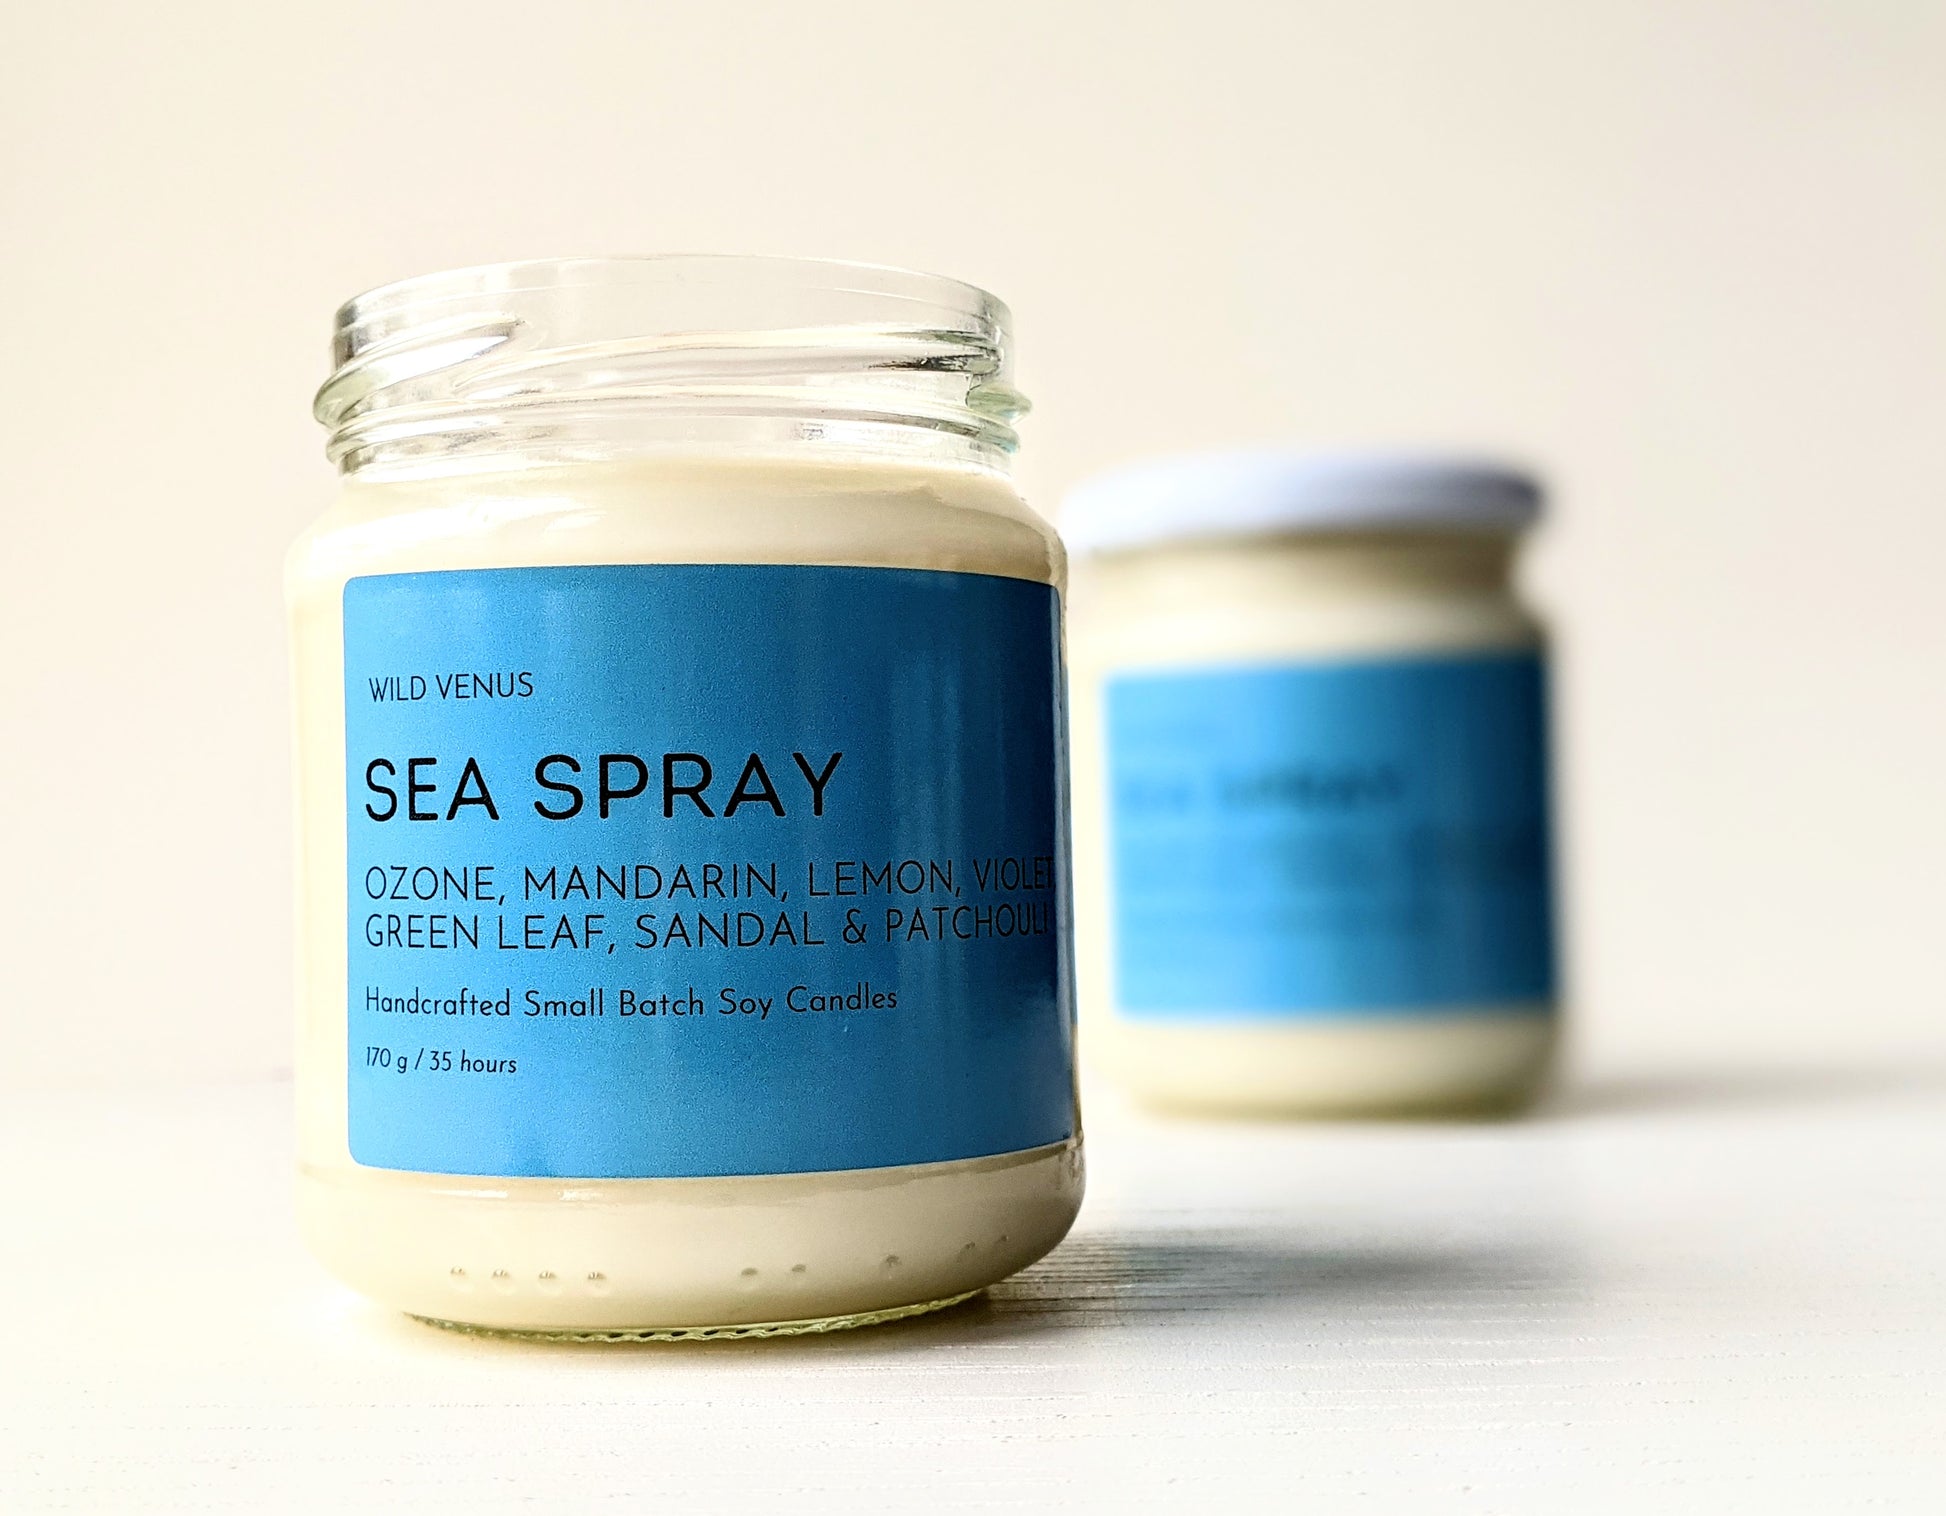 An open Sea Spray scented candle in front of a closed Sea Spray soy candle